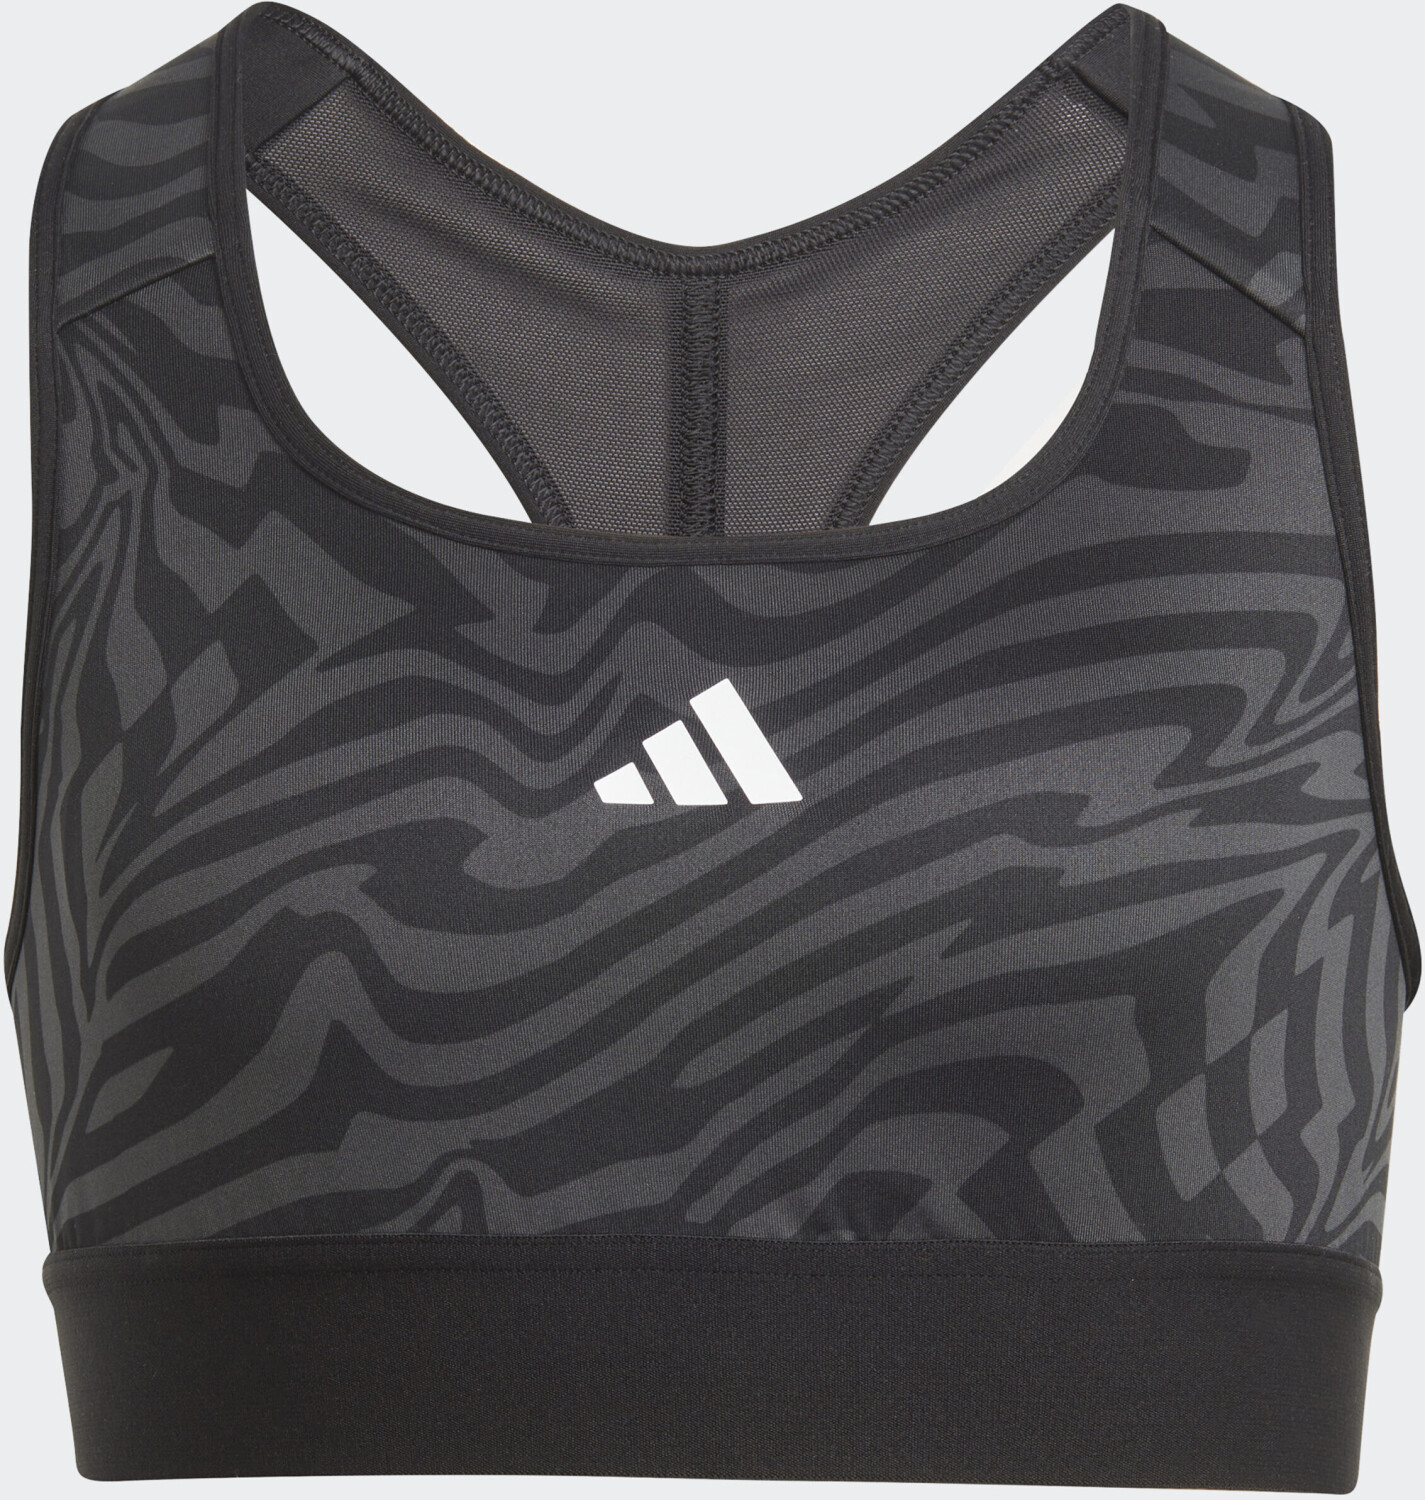 Buy Adidas Aeroready Powerreact Print Padded Kids Sports Bra (IJ9535)  Carbon / black / white from £12.75 (Today) – Best Deals on